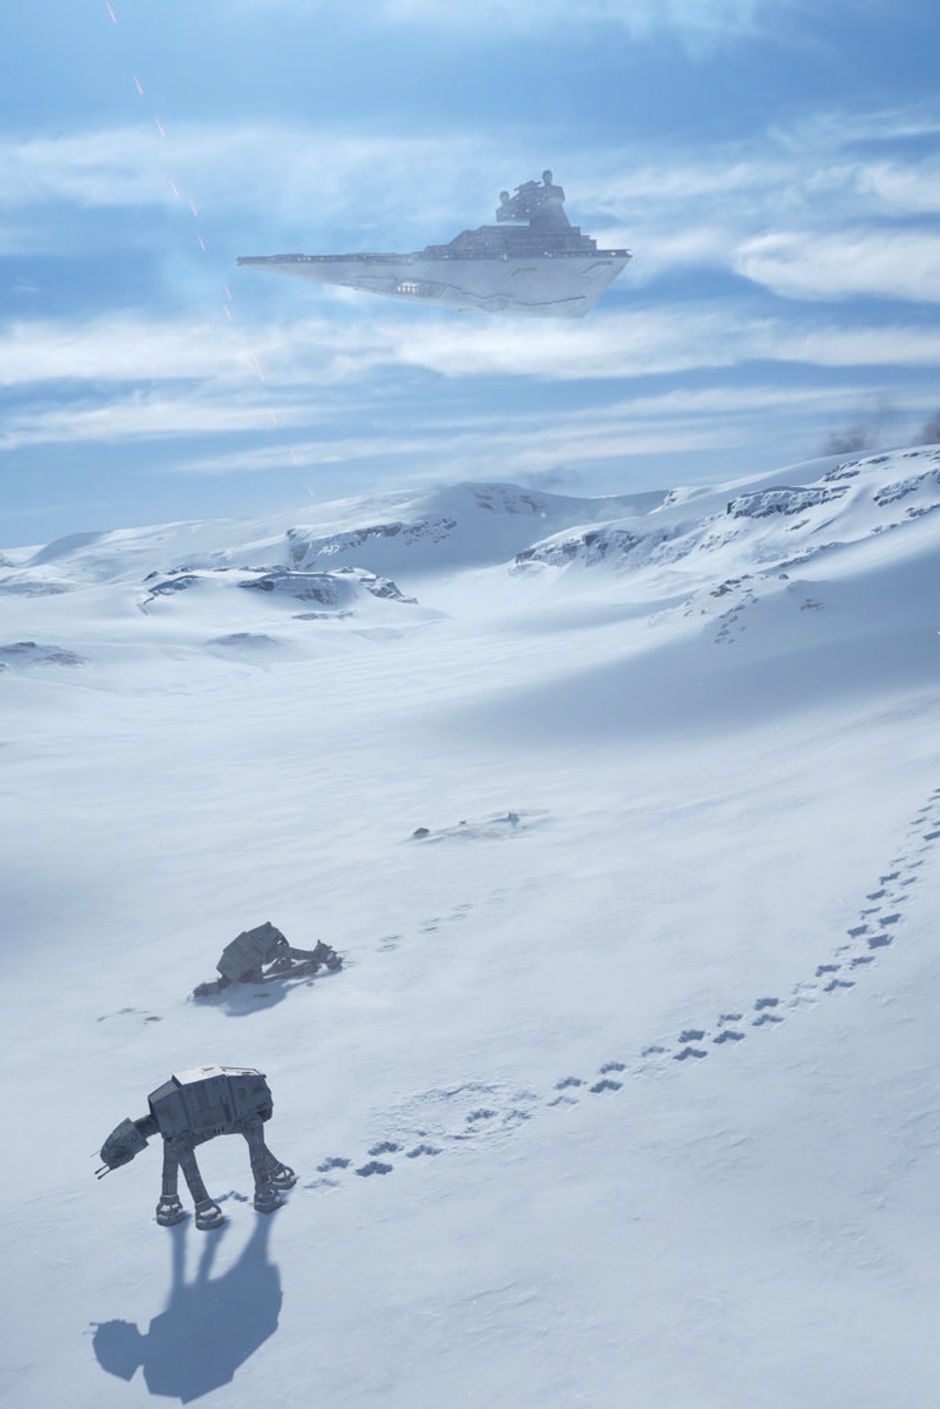 These Star Wars Battlefront Screenshots Are Beautiful